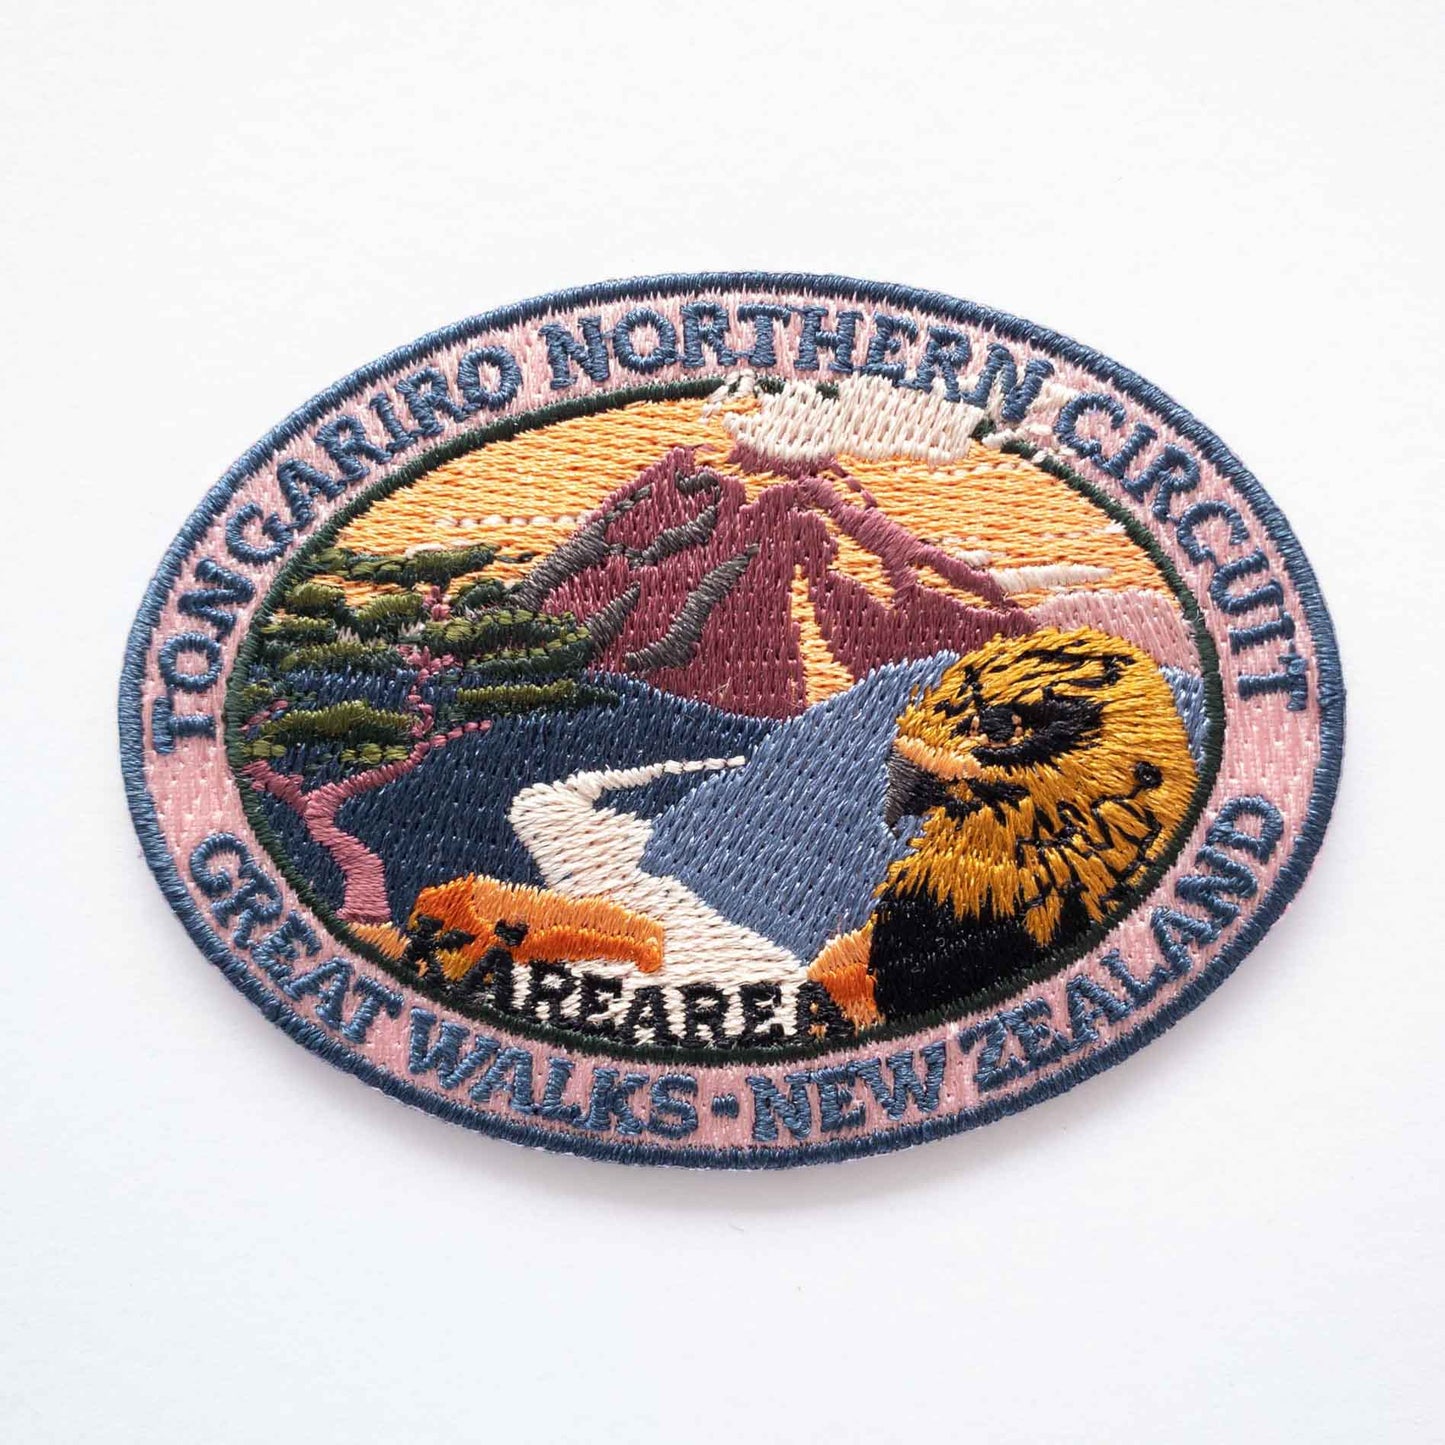 Oval, embroidered Tongaririo Northern Circuit Track patch, with a karearea/falcon, purple active volcano peak and orange sky.